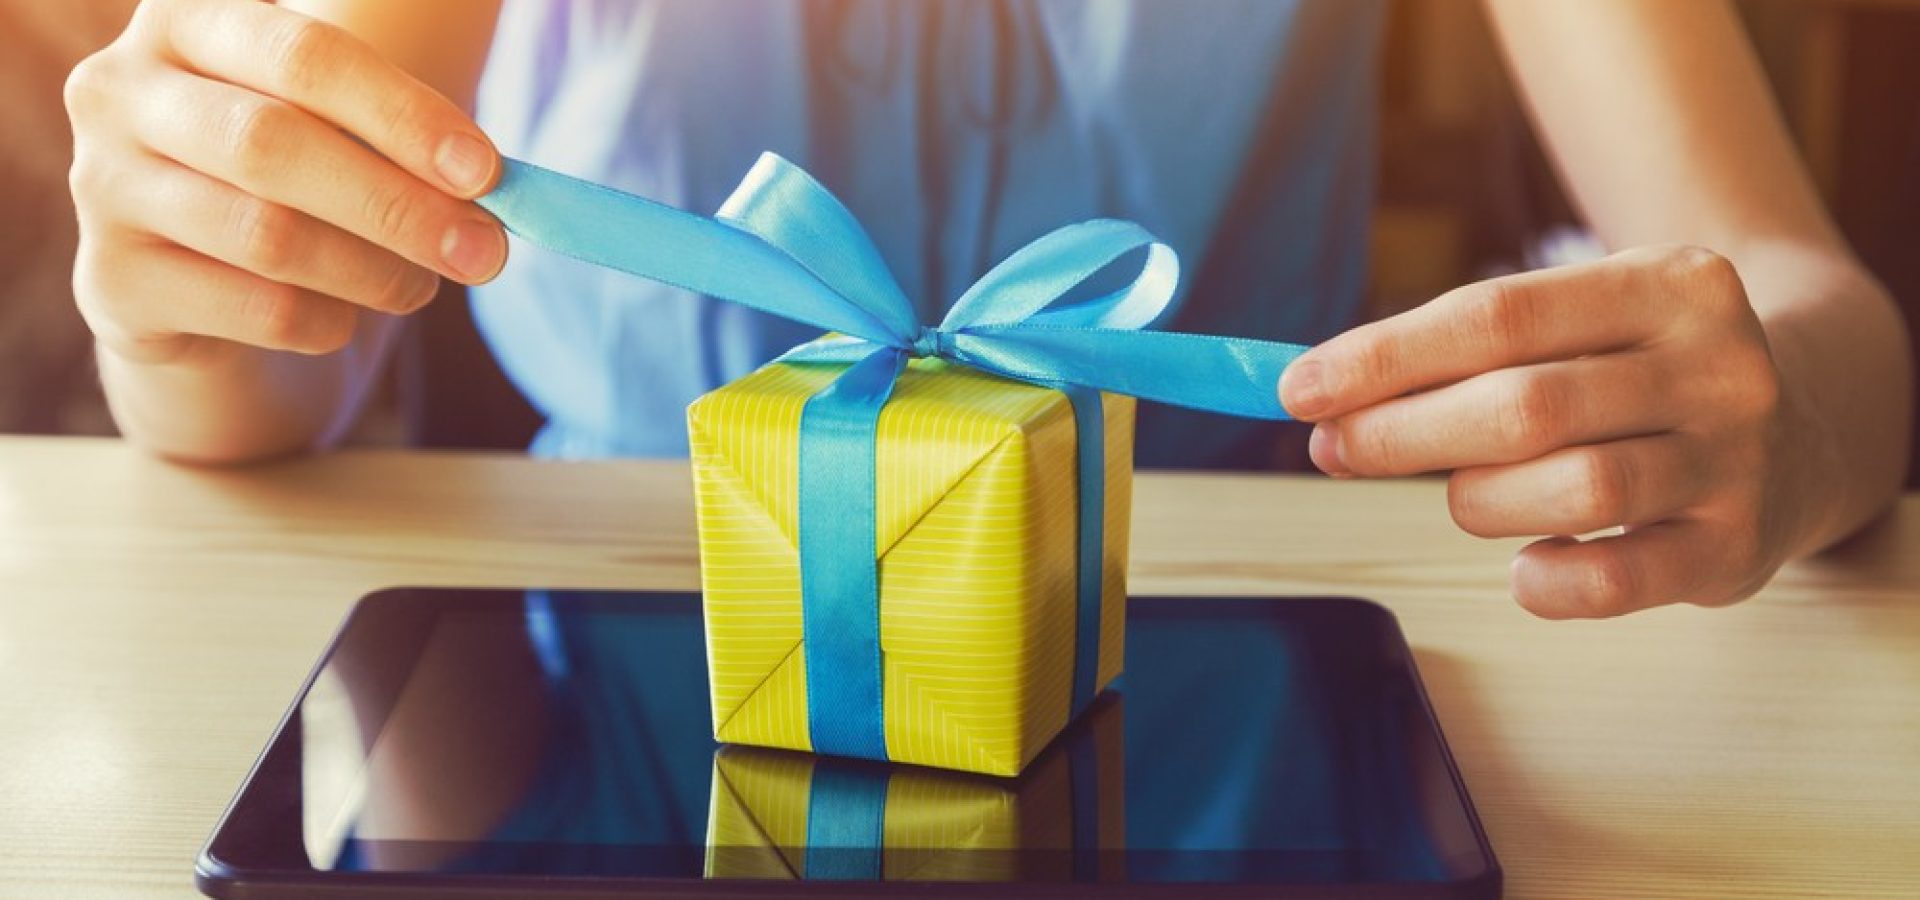 What experts suggest for the best tech gift ideas in 2021